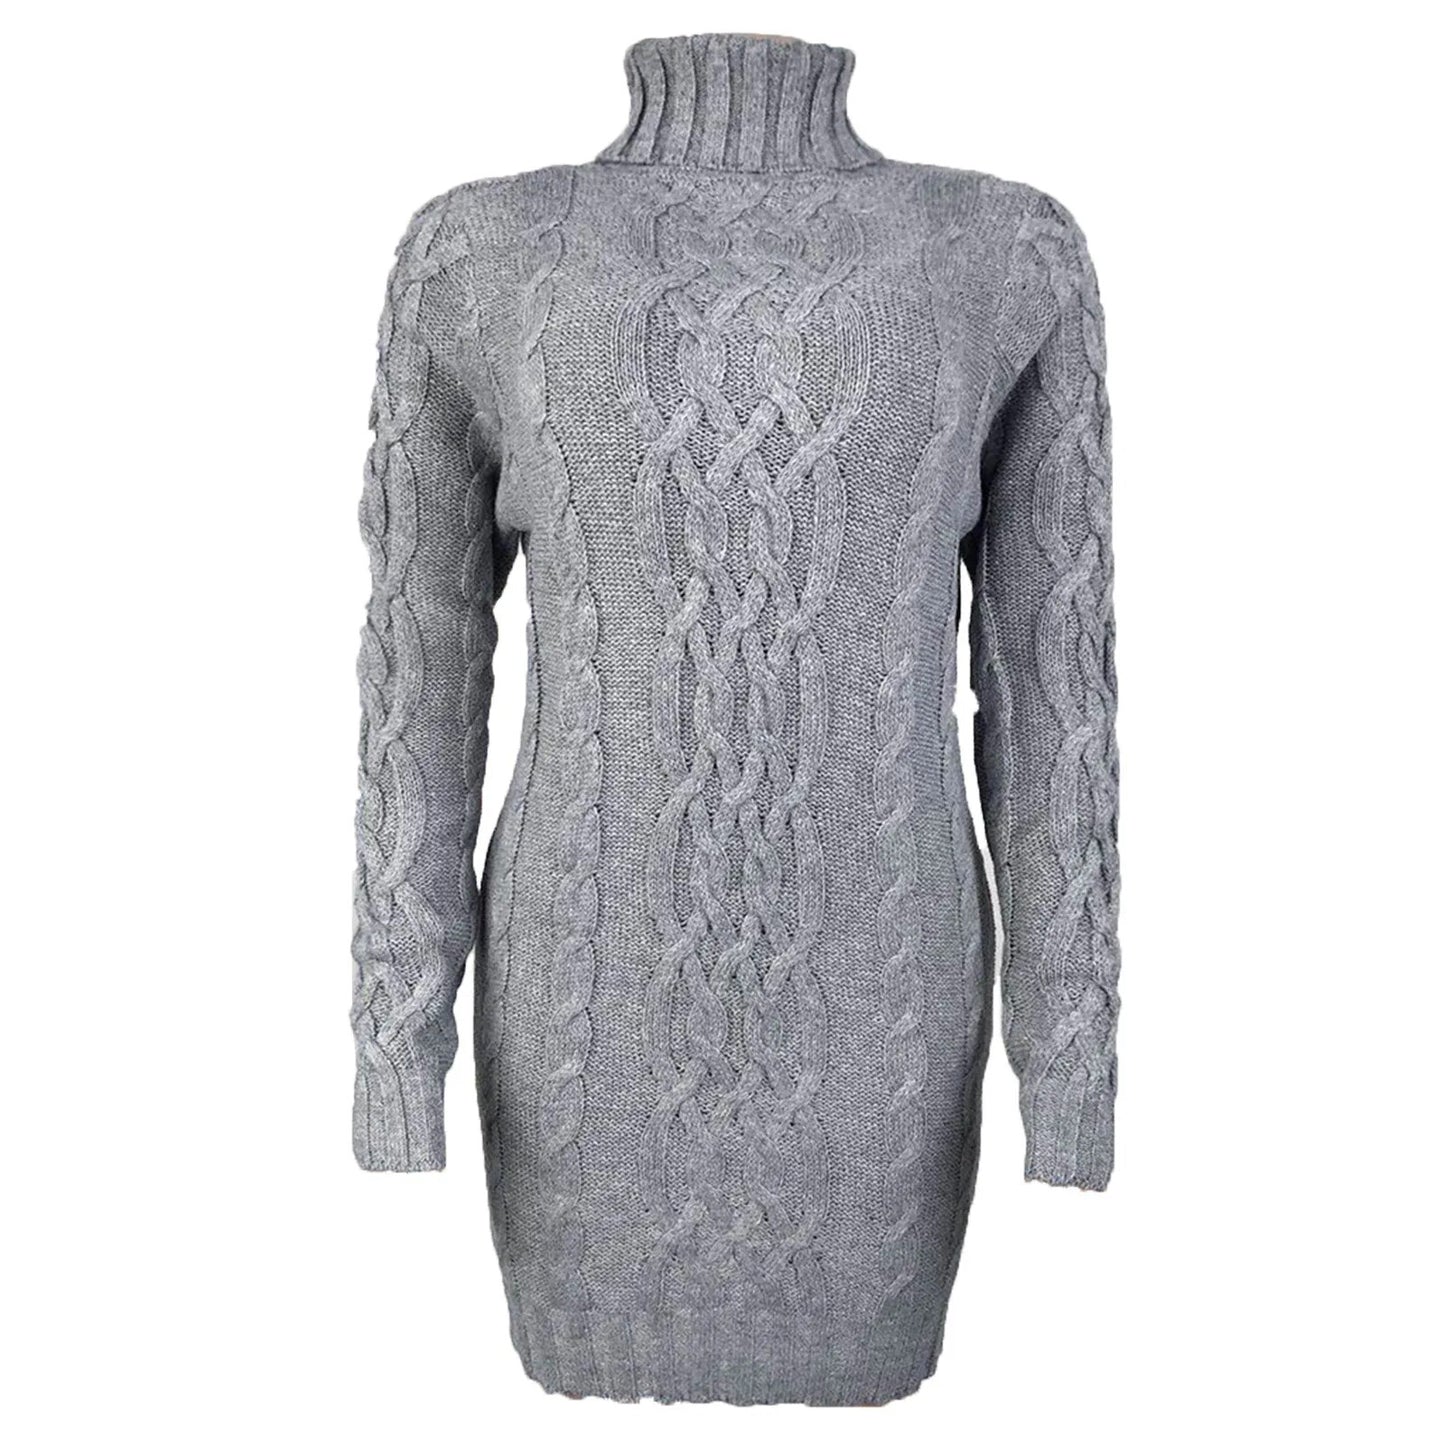 Elegant women's sweater with a cable pattern